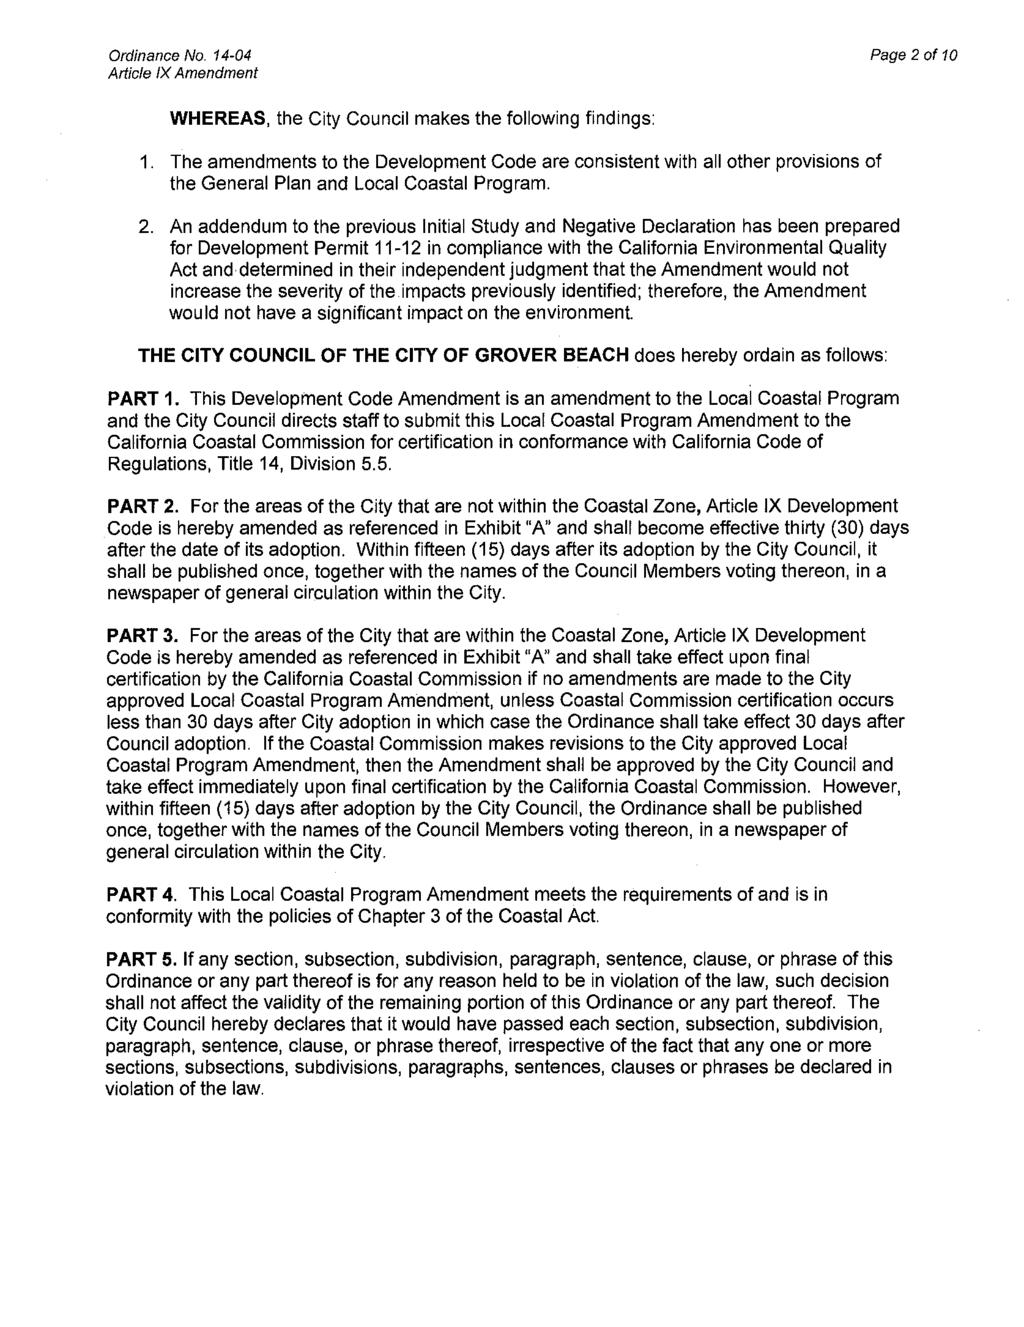 Page 2 of 10 WHEREAS, the City Council makes the following findings: 1. The amendments to the Development Code are consistent with all other provisions of the General Plan and Local Coastal Program.